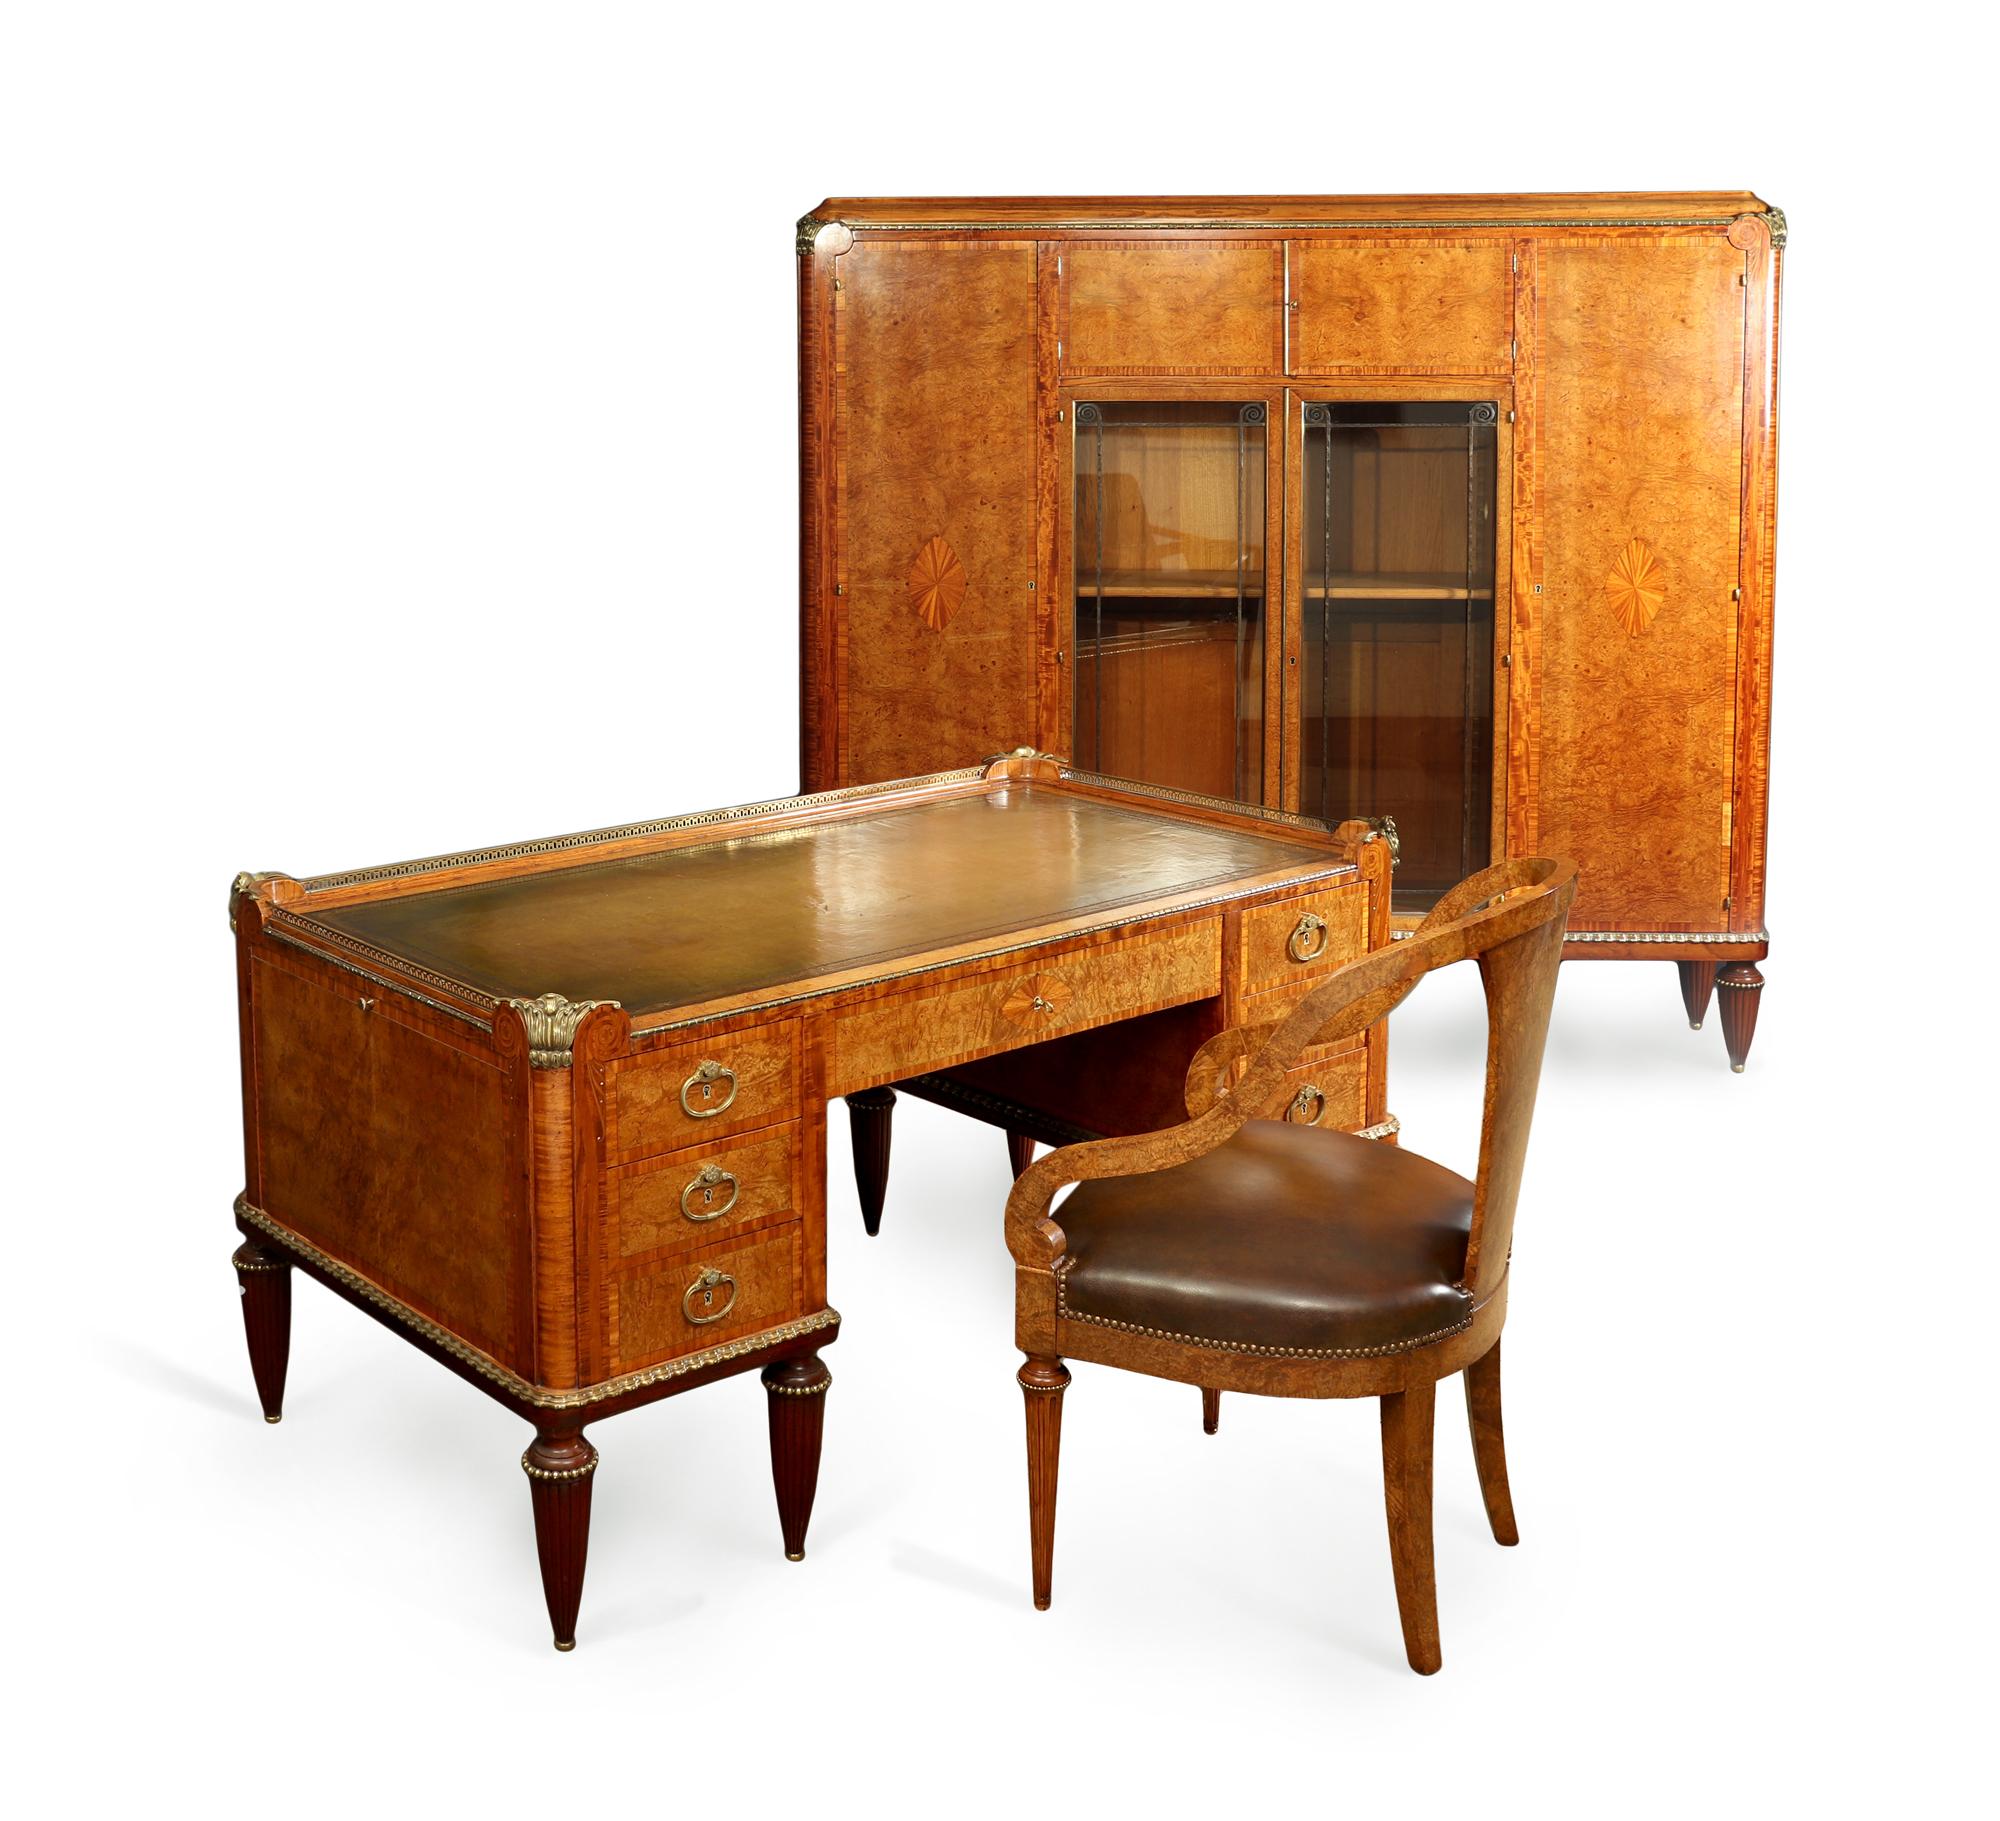 Early 20th Century French Art Deco Desk, Chair and Bookcase by Maurice Dufrene